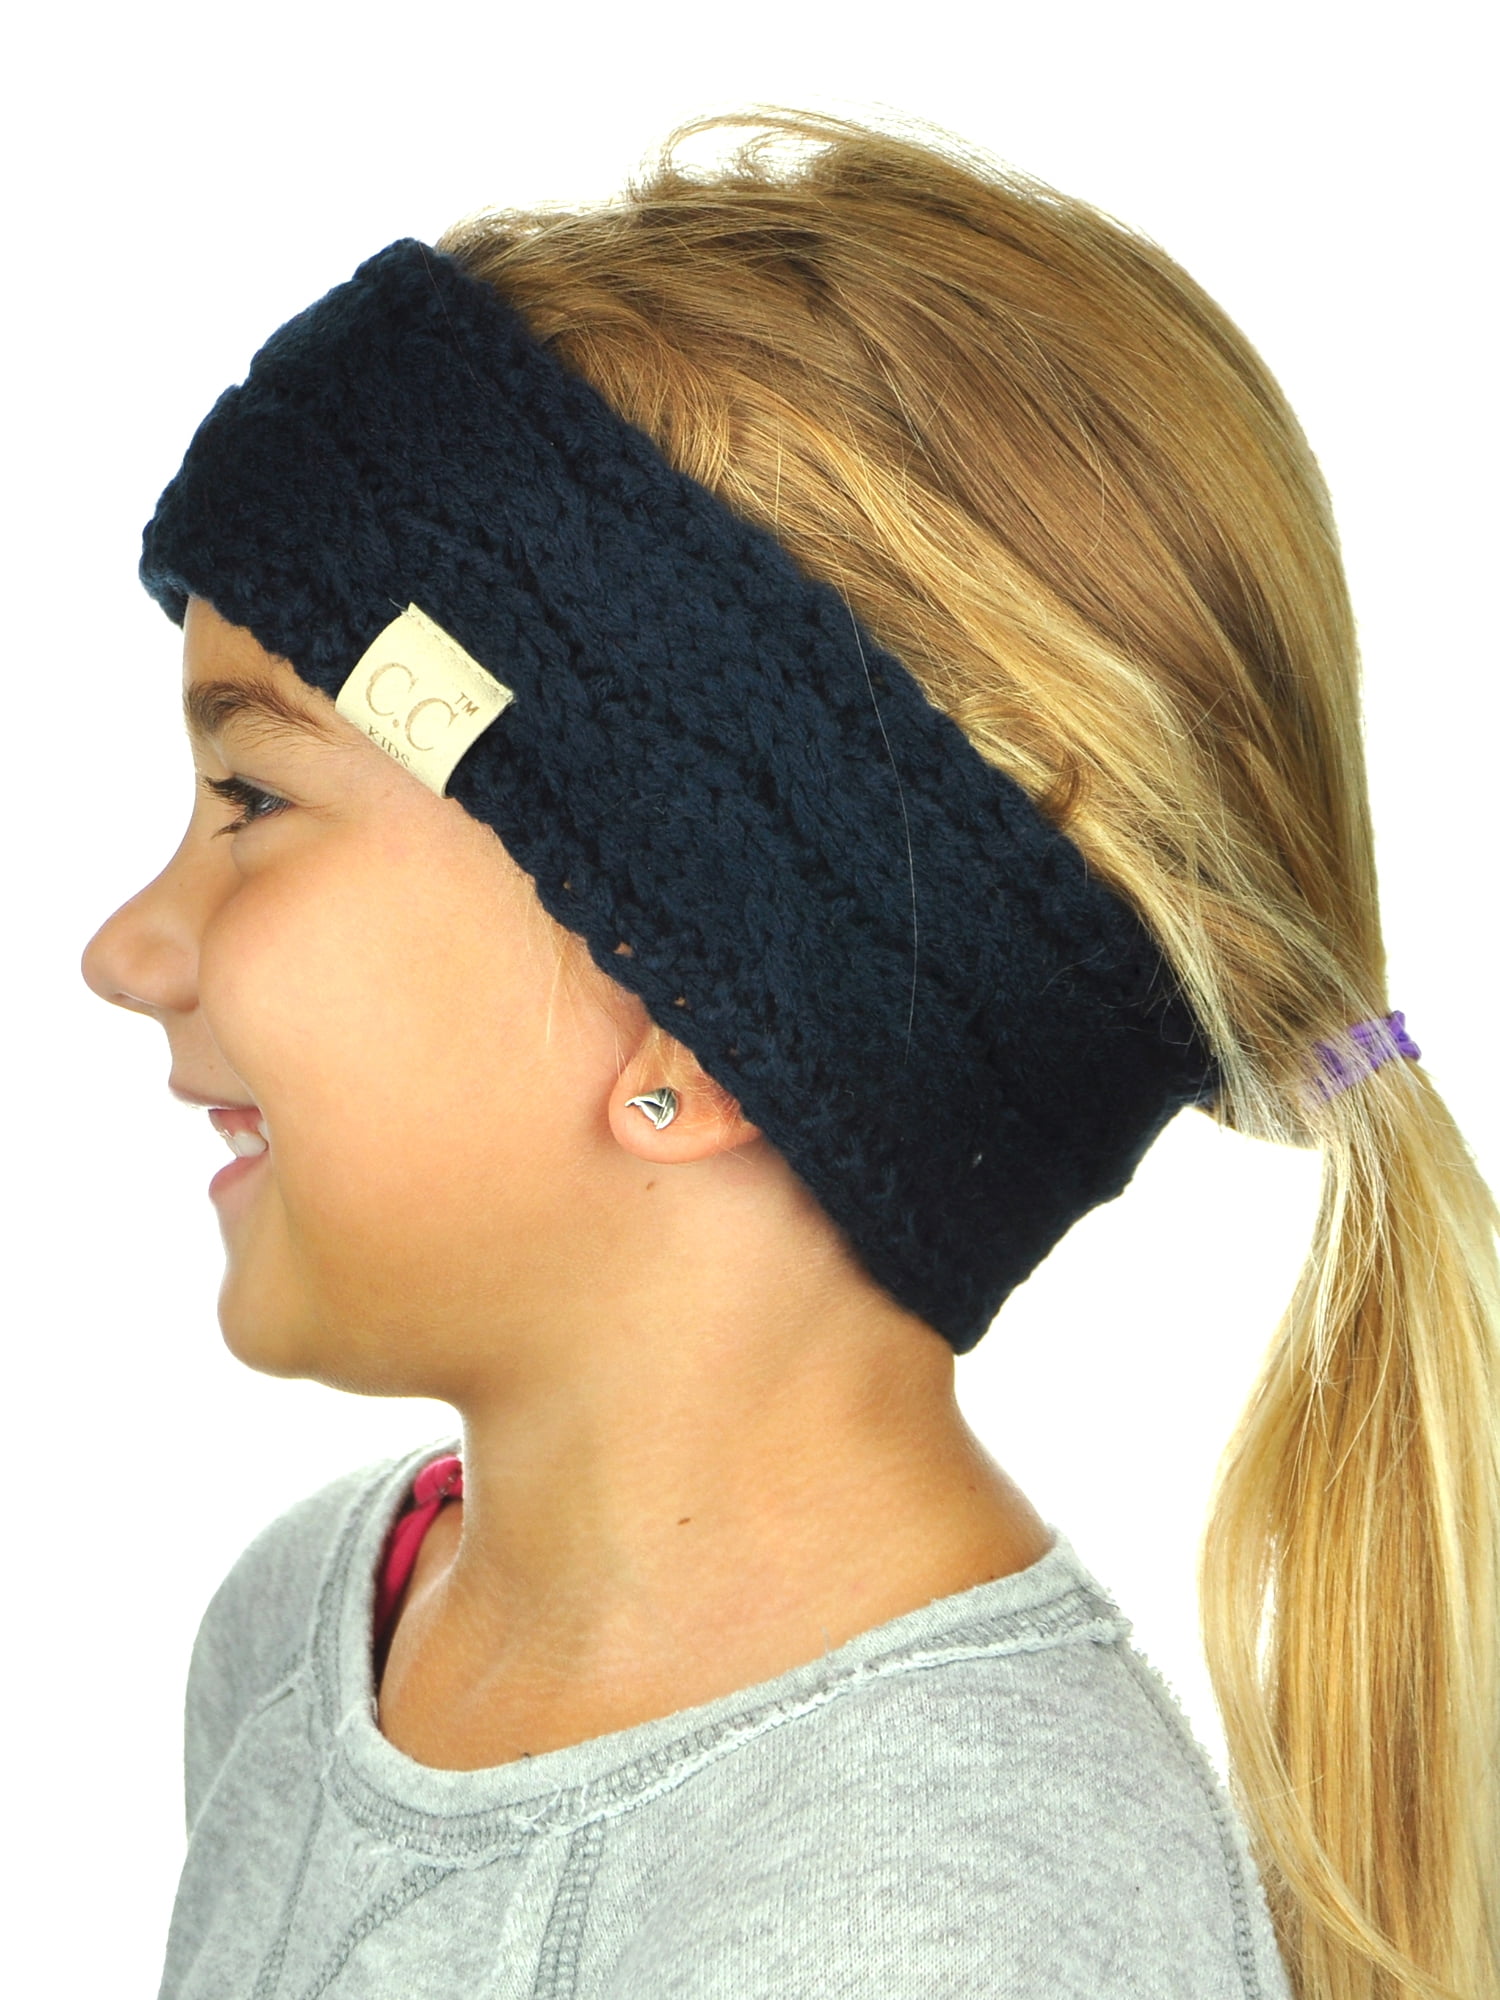 Details about   Gymboree Color Happy Blue Ear Warmer Headband w/ Pom Poms Girl's One Size NWT 